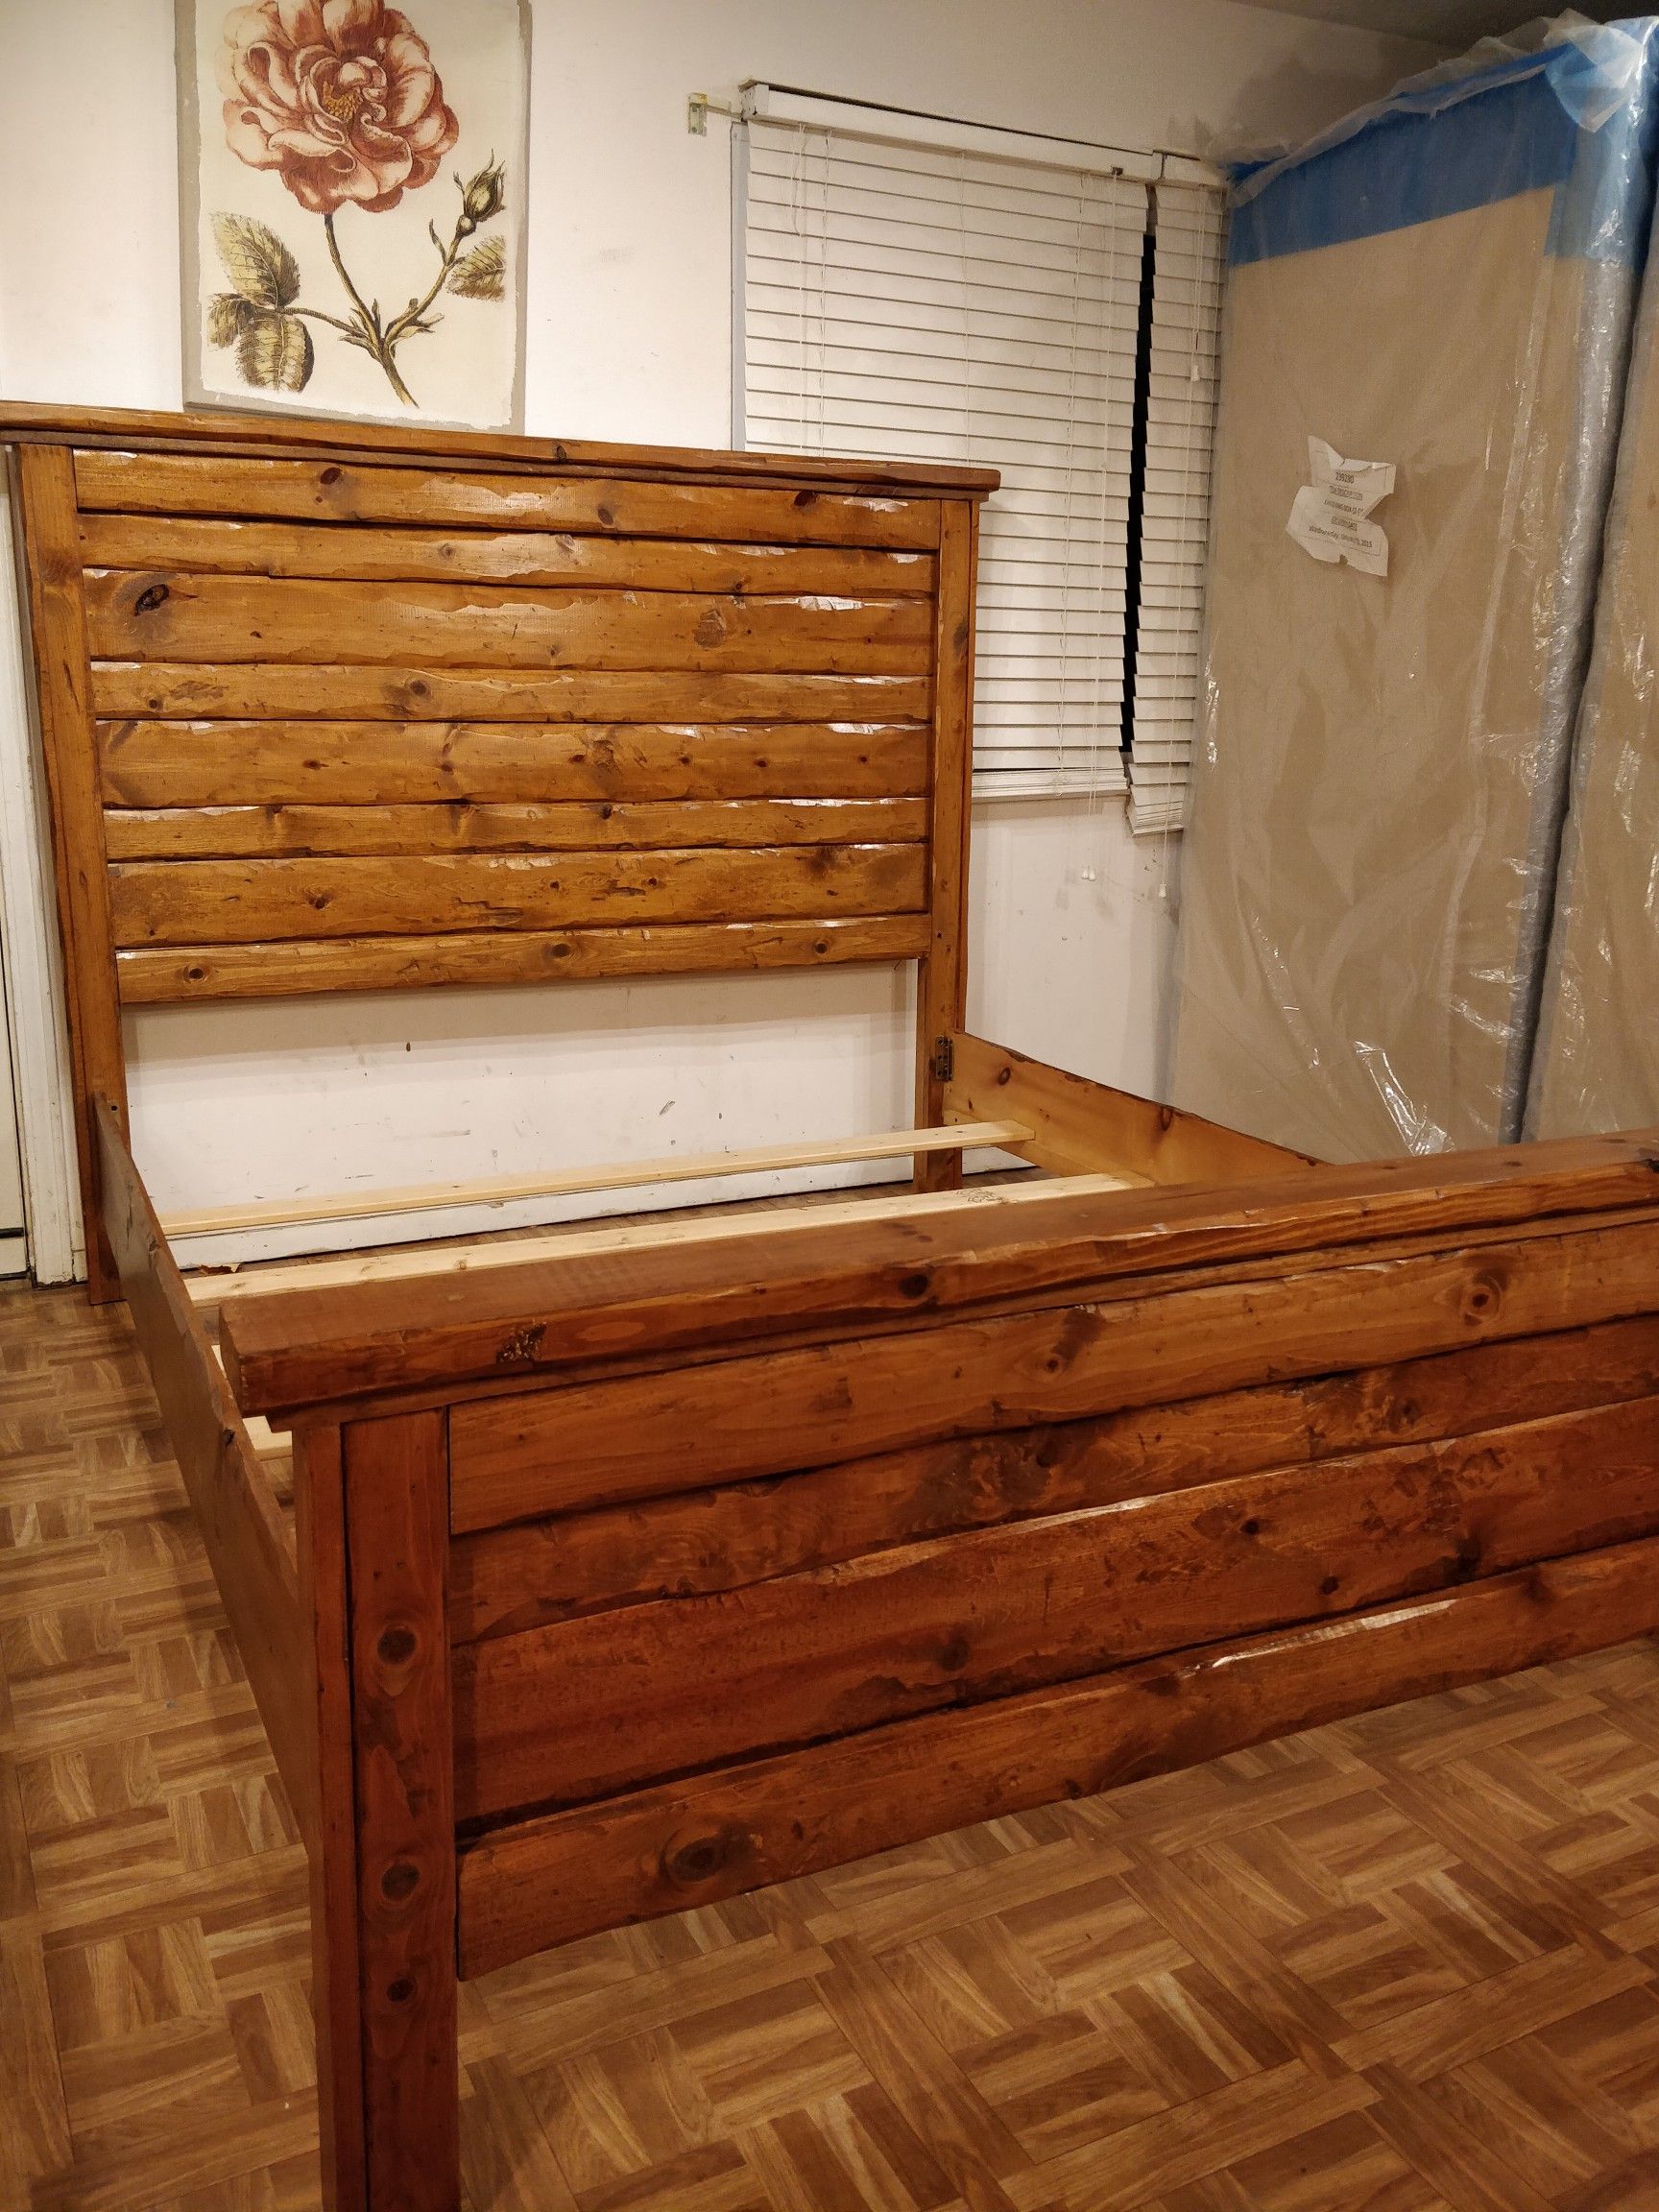 Piece of art solid wood queen size bed frame in great condition. Headboard L68"*H58"